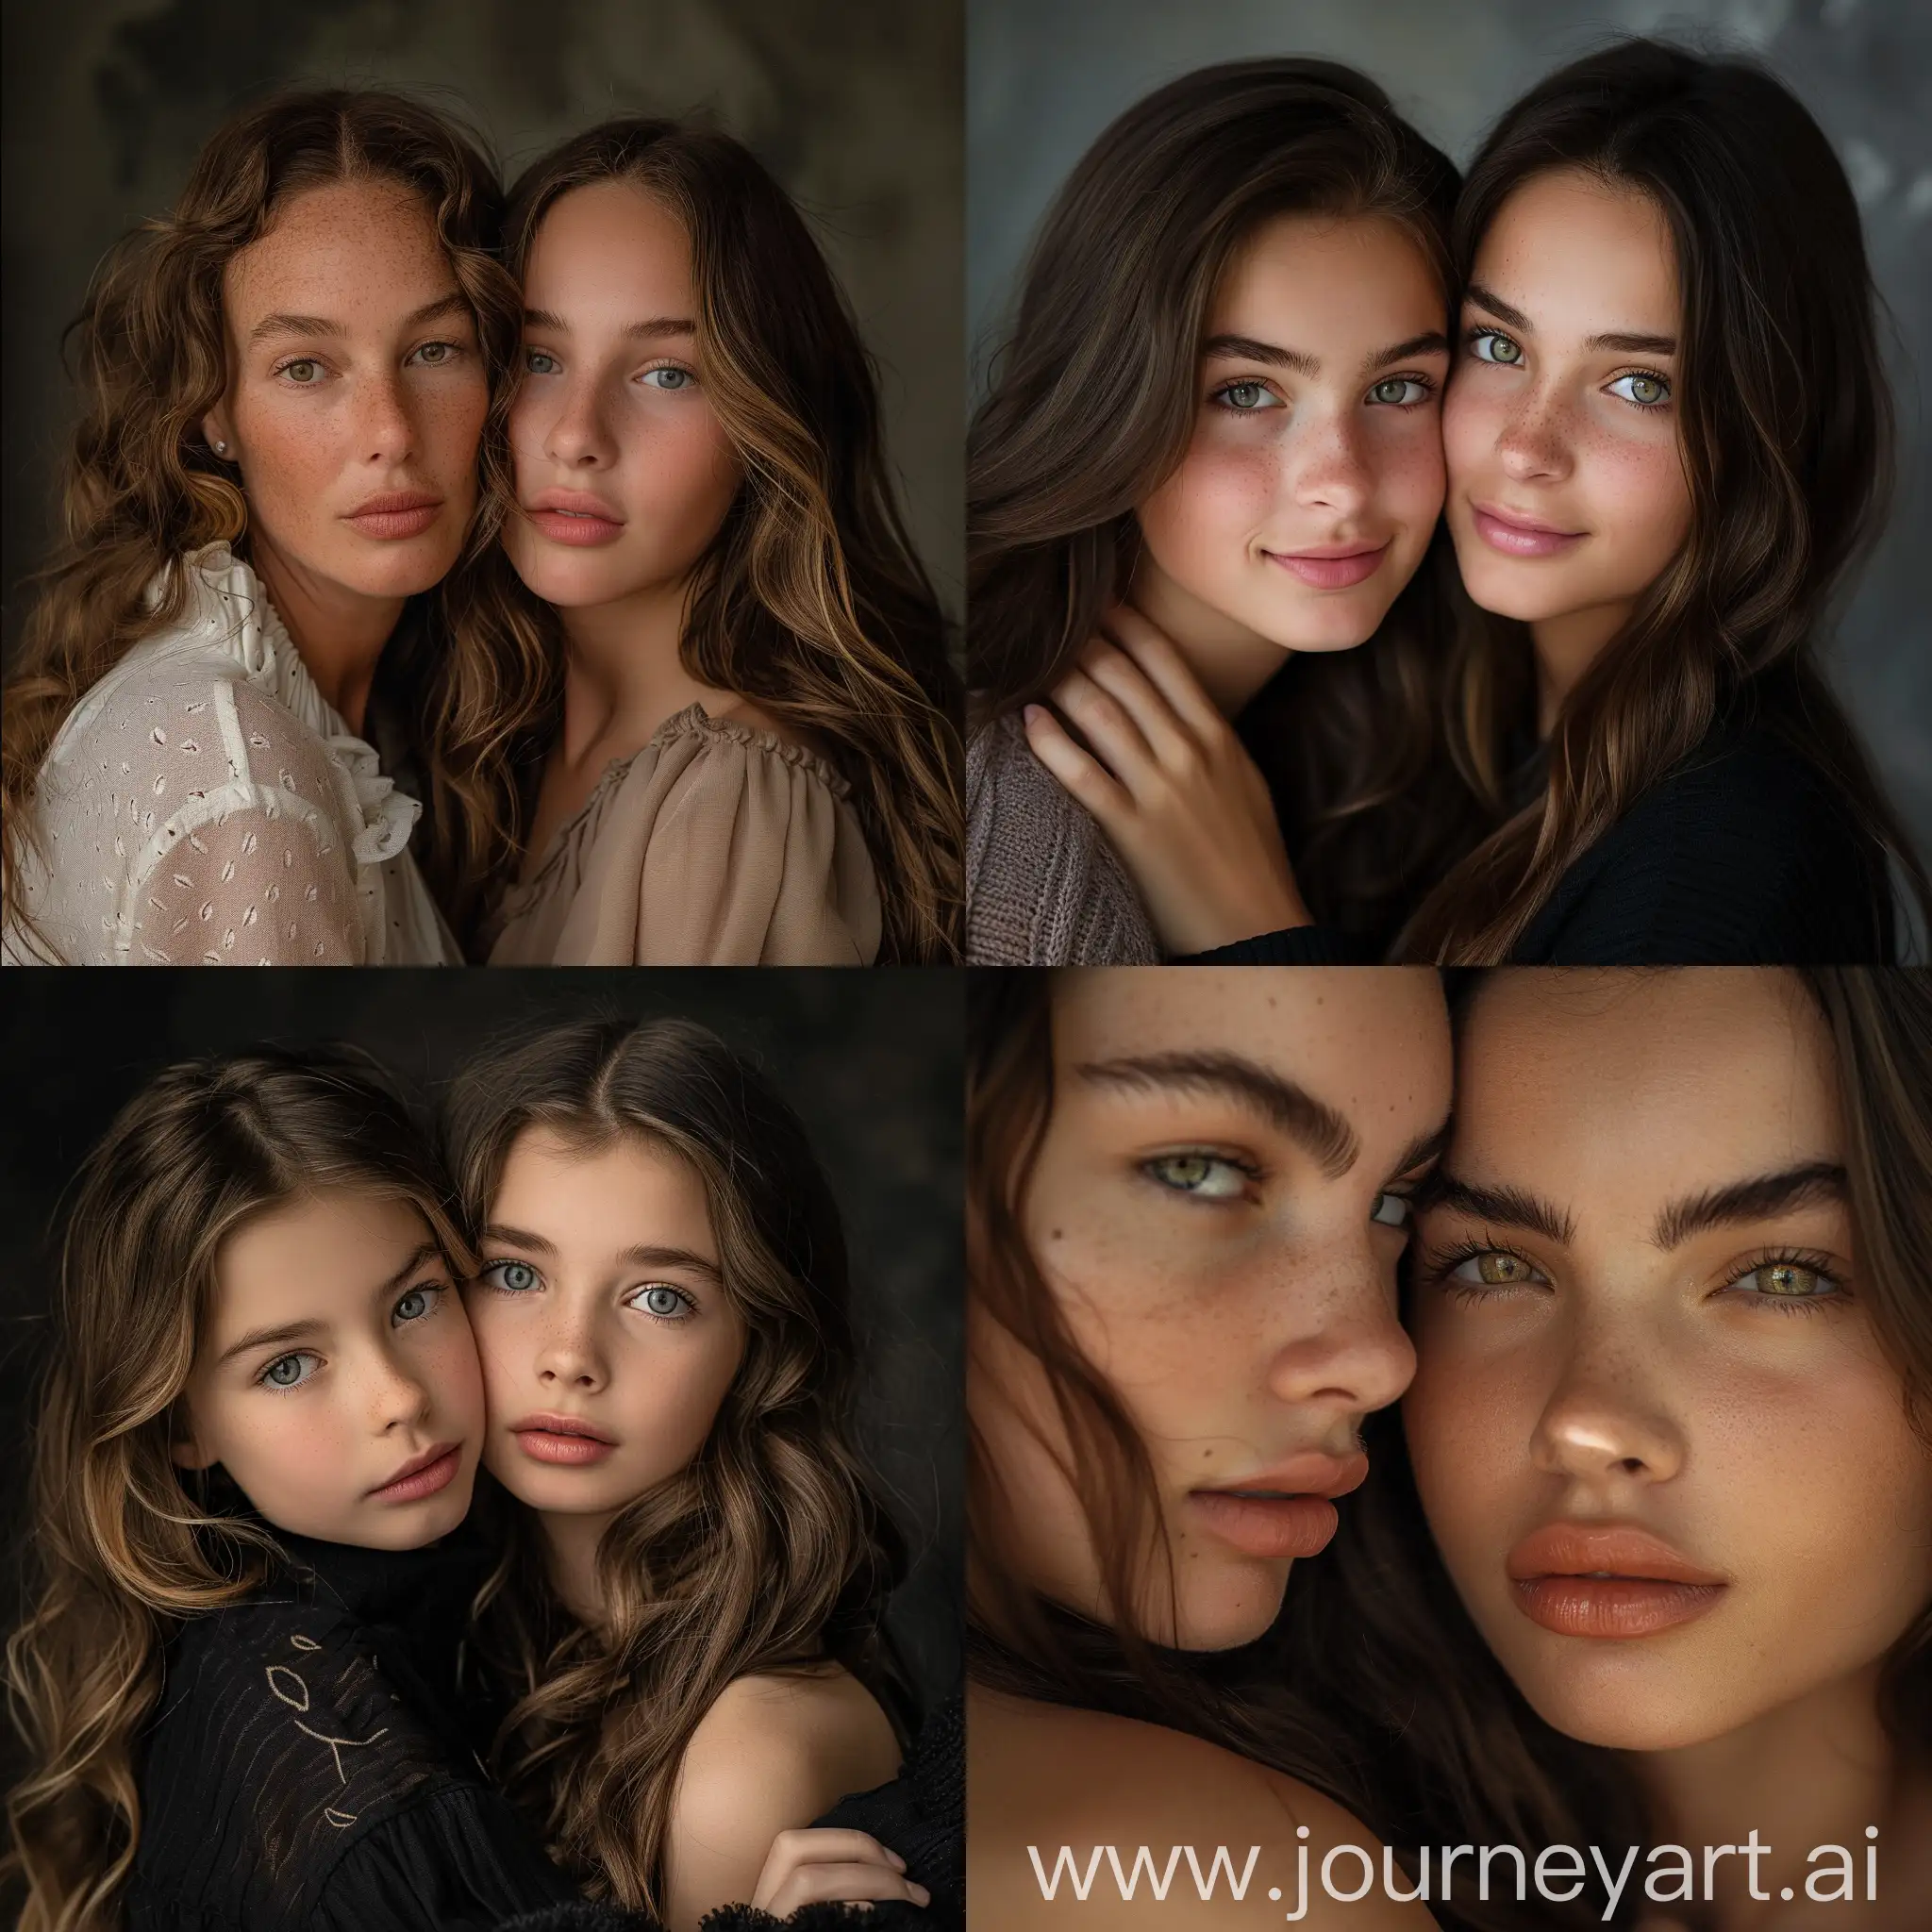 Aesthetic professional portrait of a girl and her mother, professional studio, studio lighting, close together, super model faces, bushy eyebrows, full and thick hair